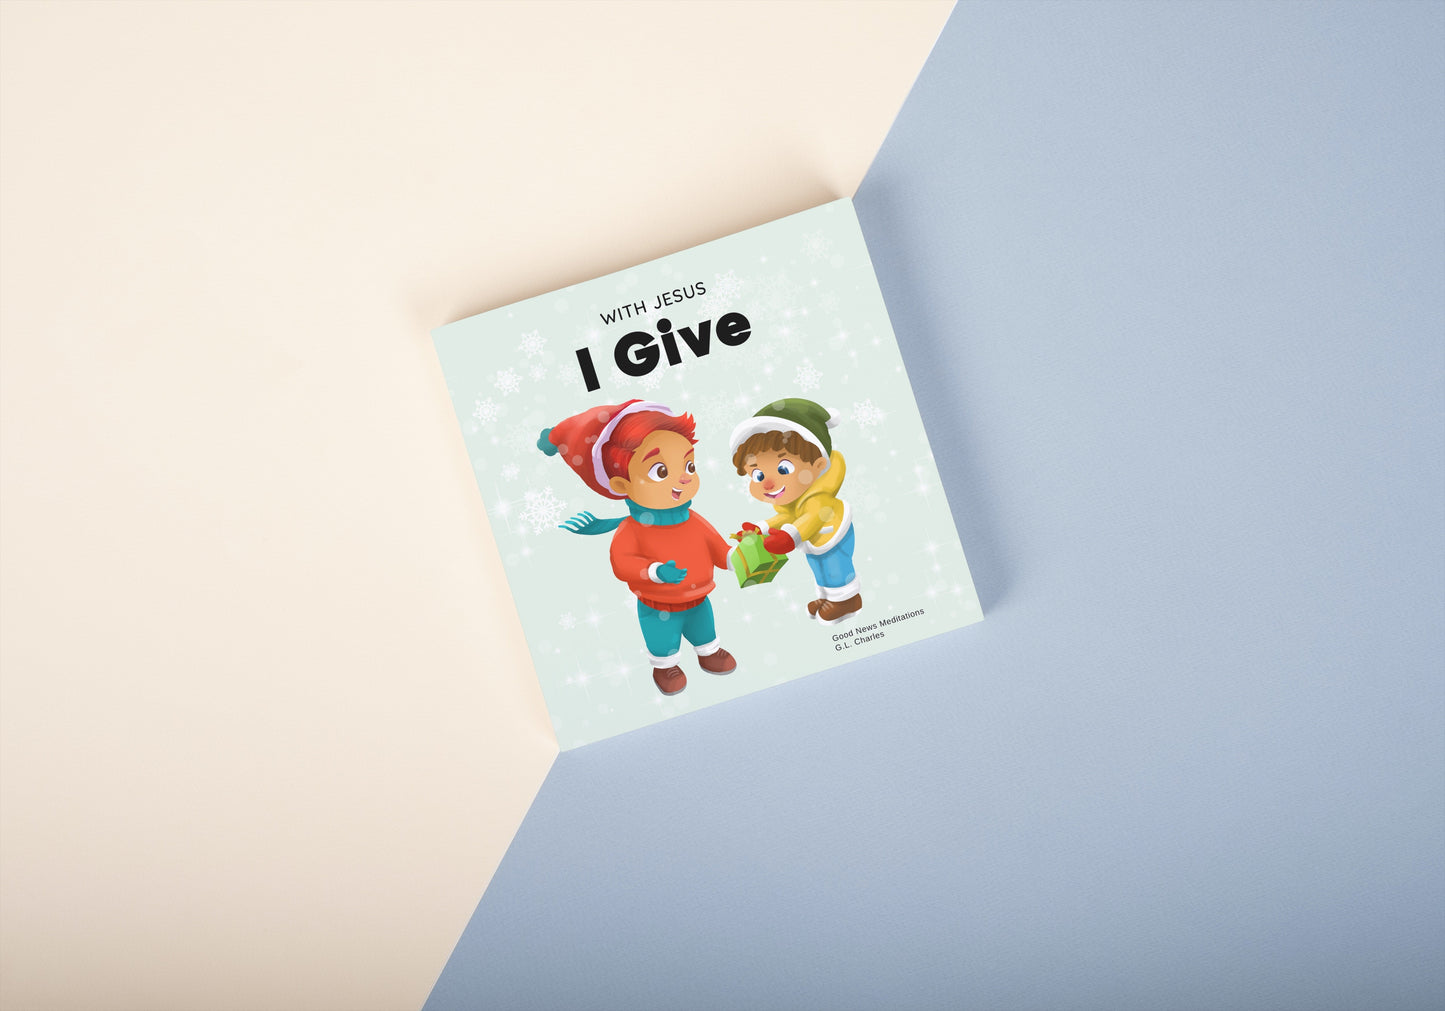 With Jesus I Give - Printed in the UK